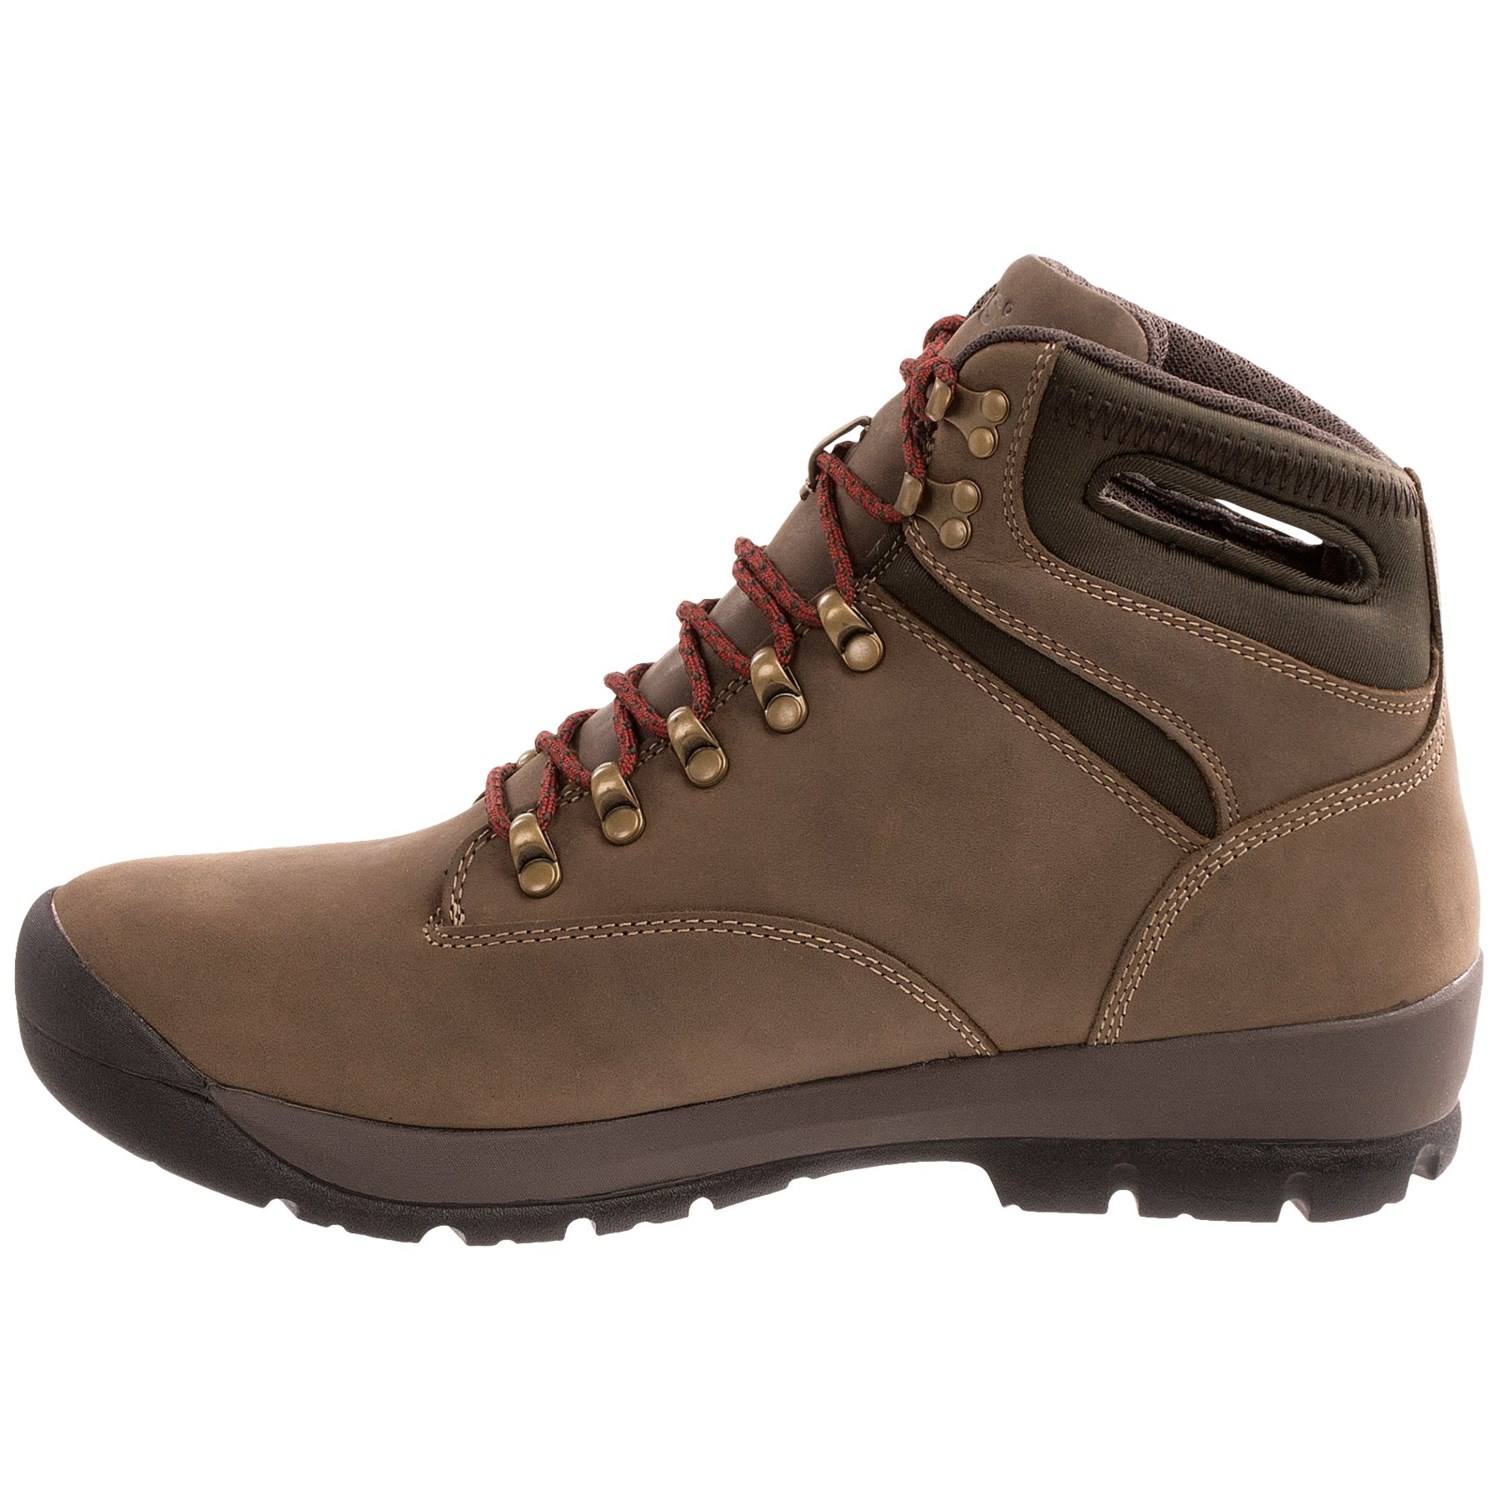 Bogs Footwear Tumalo Boots (For Men) 8863X - Save 58%